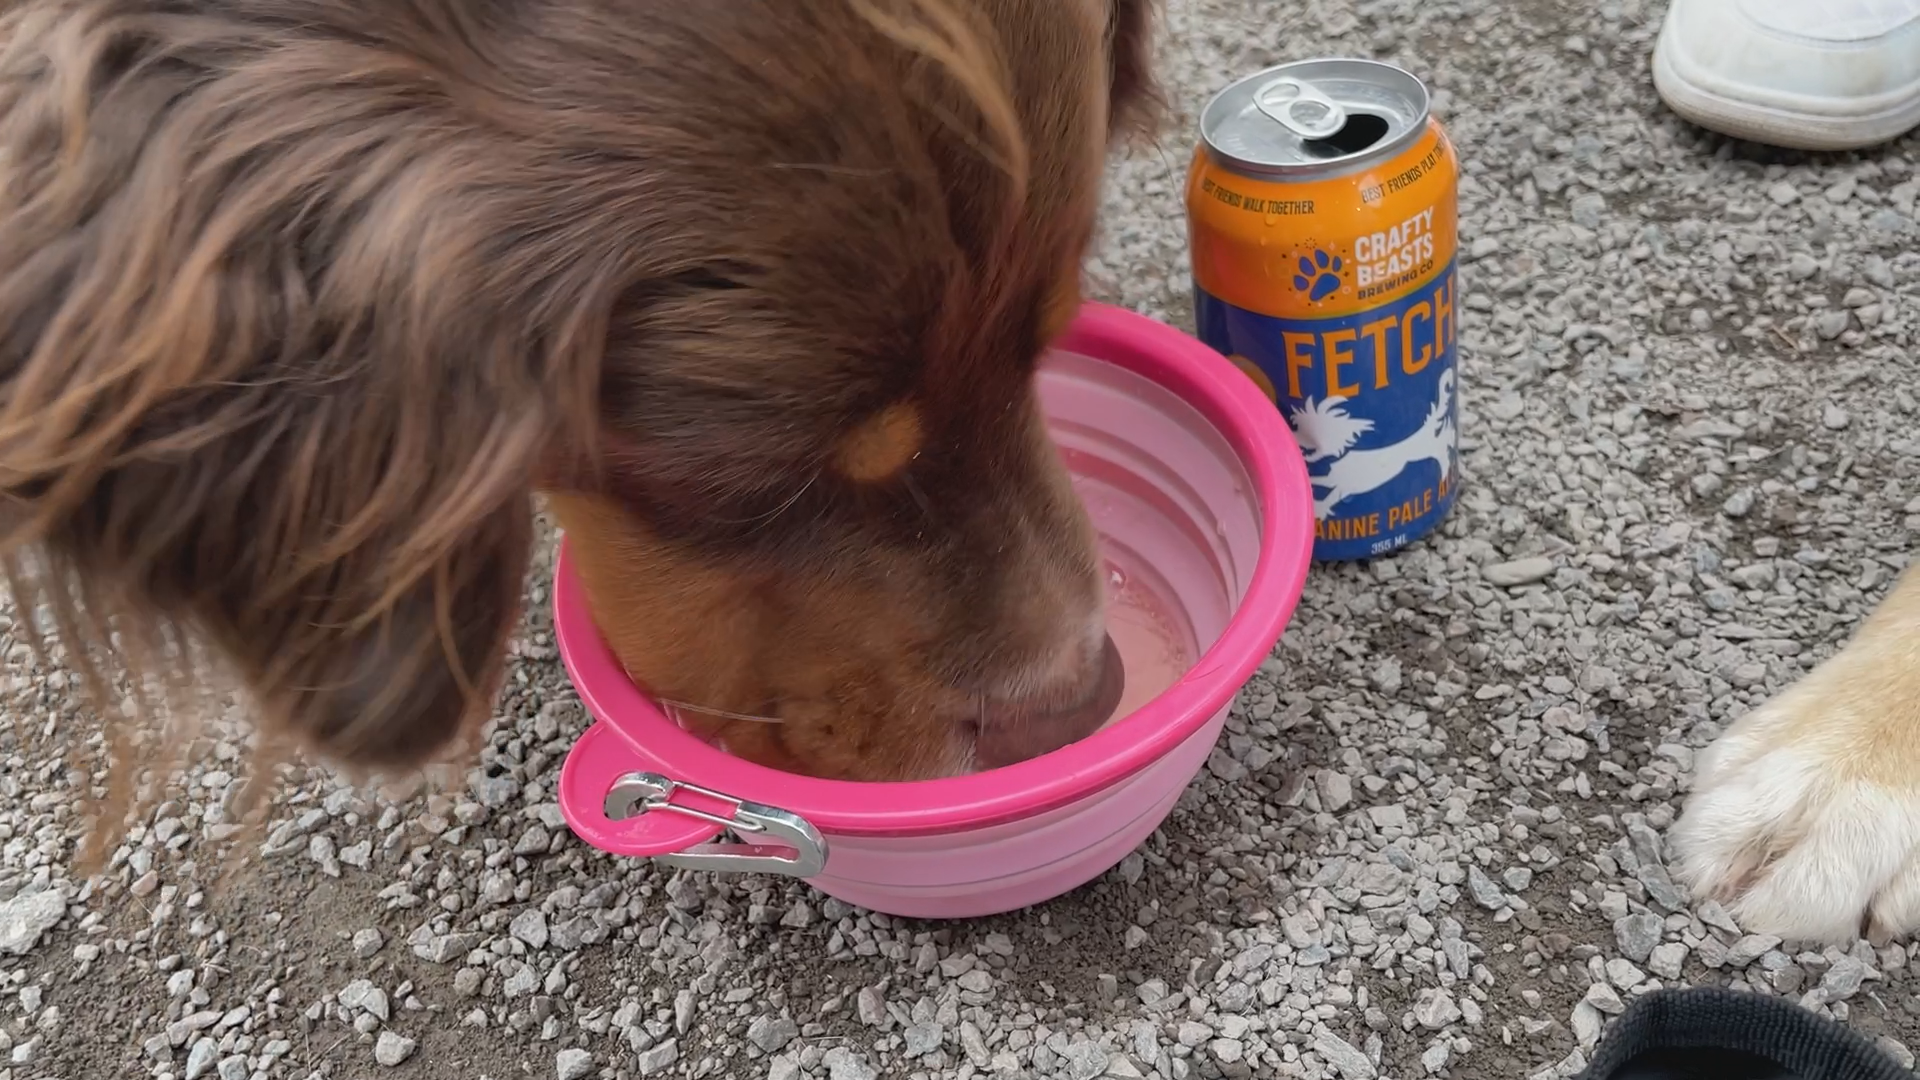 Company launches non-alcoholic beer for dogs, canines ‘crack a cold one’